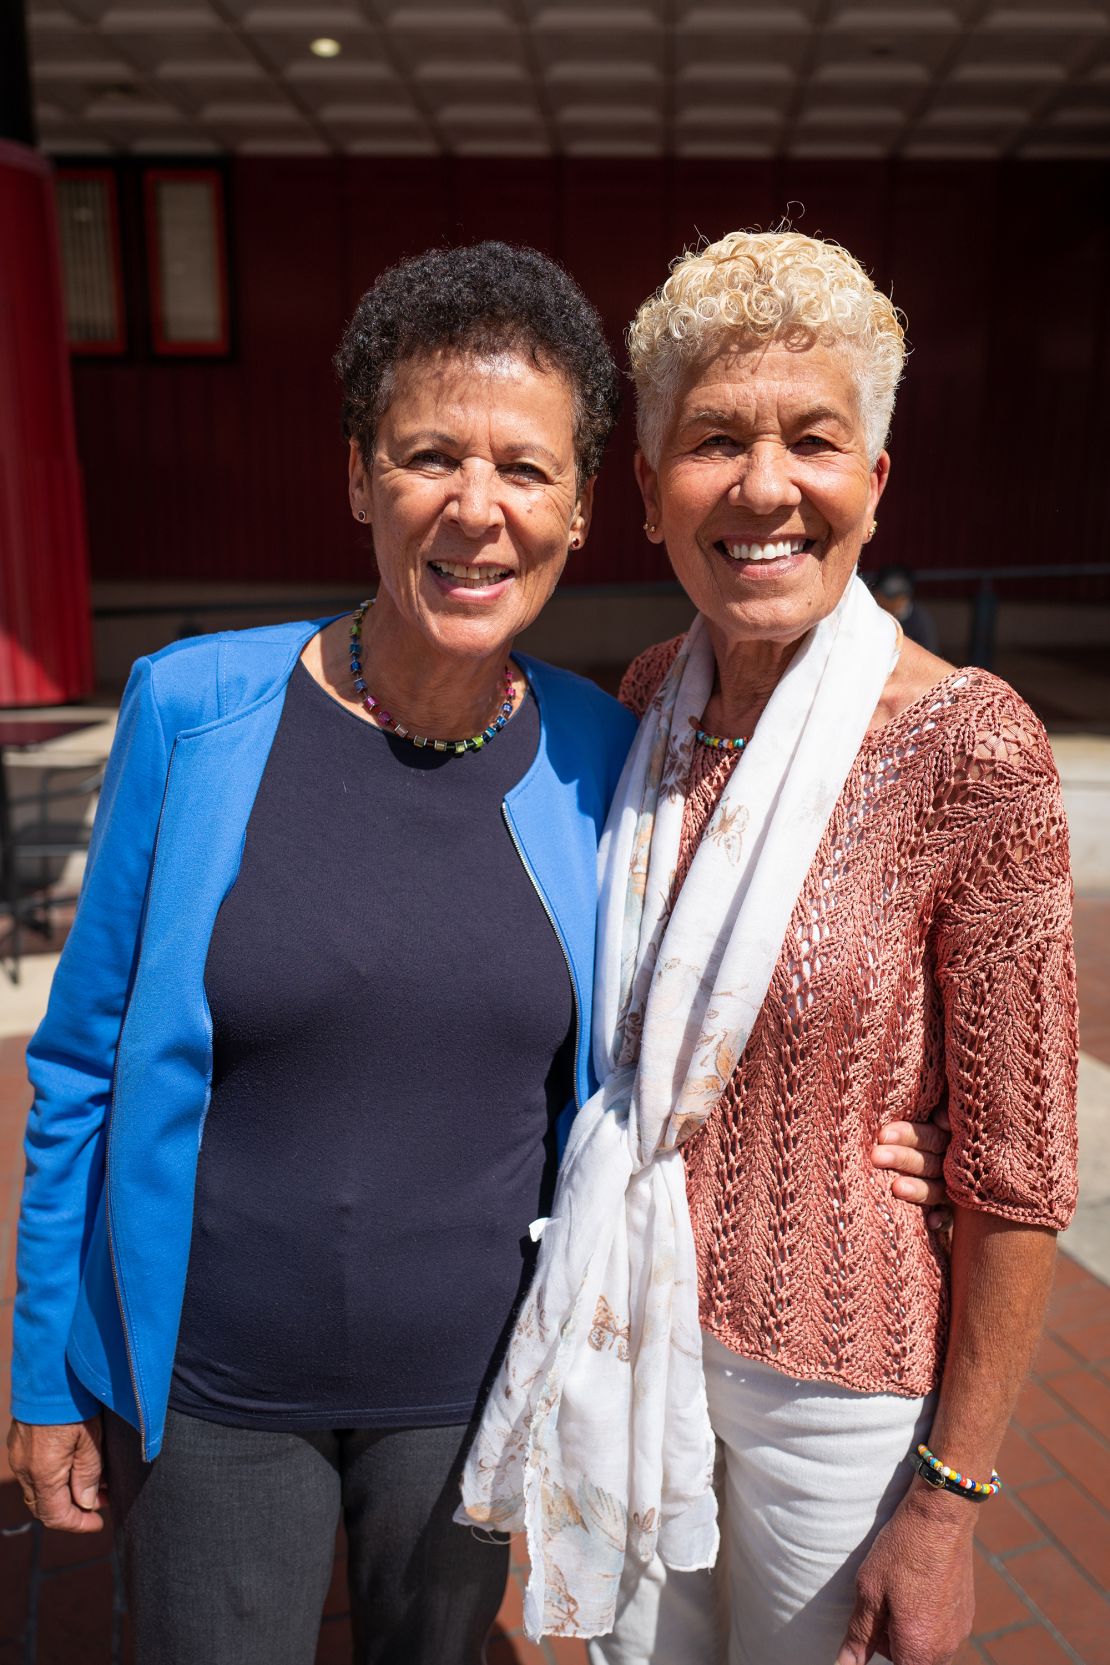 Deborah Prior and Carol Edwards grew up together at Holnicote House, and have remained friends.